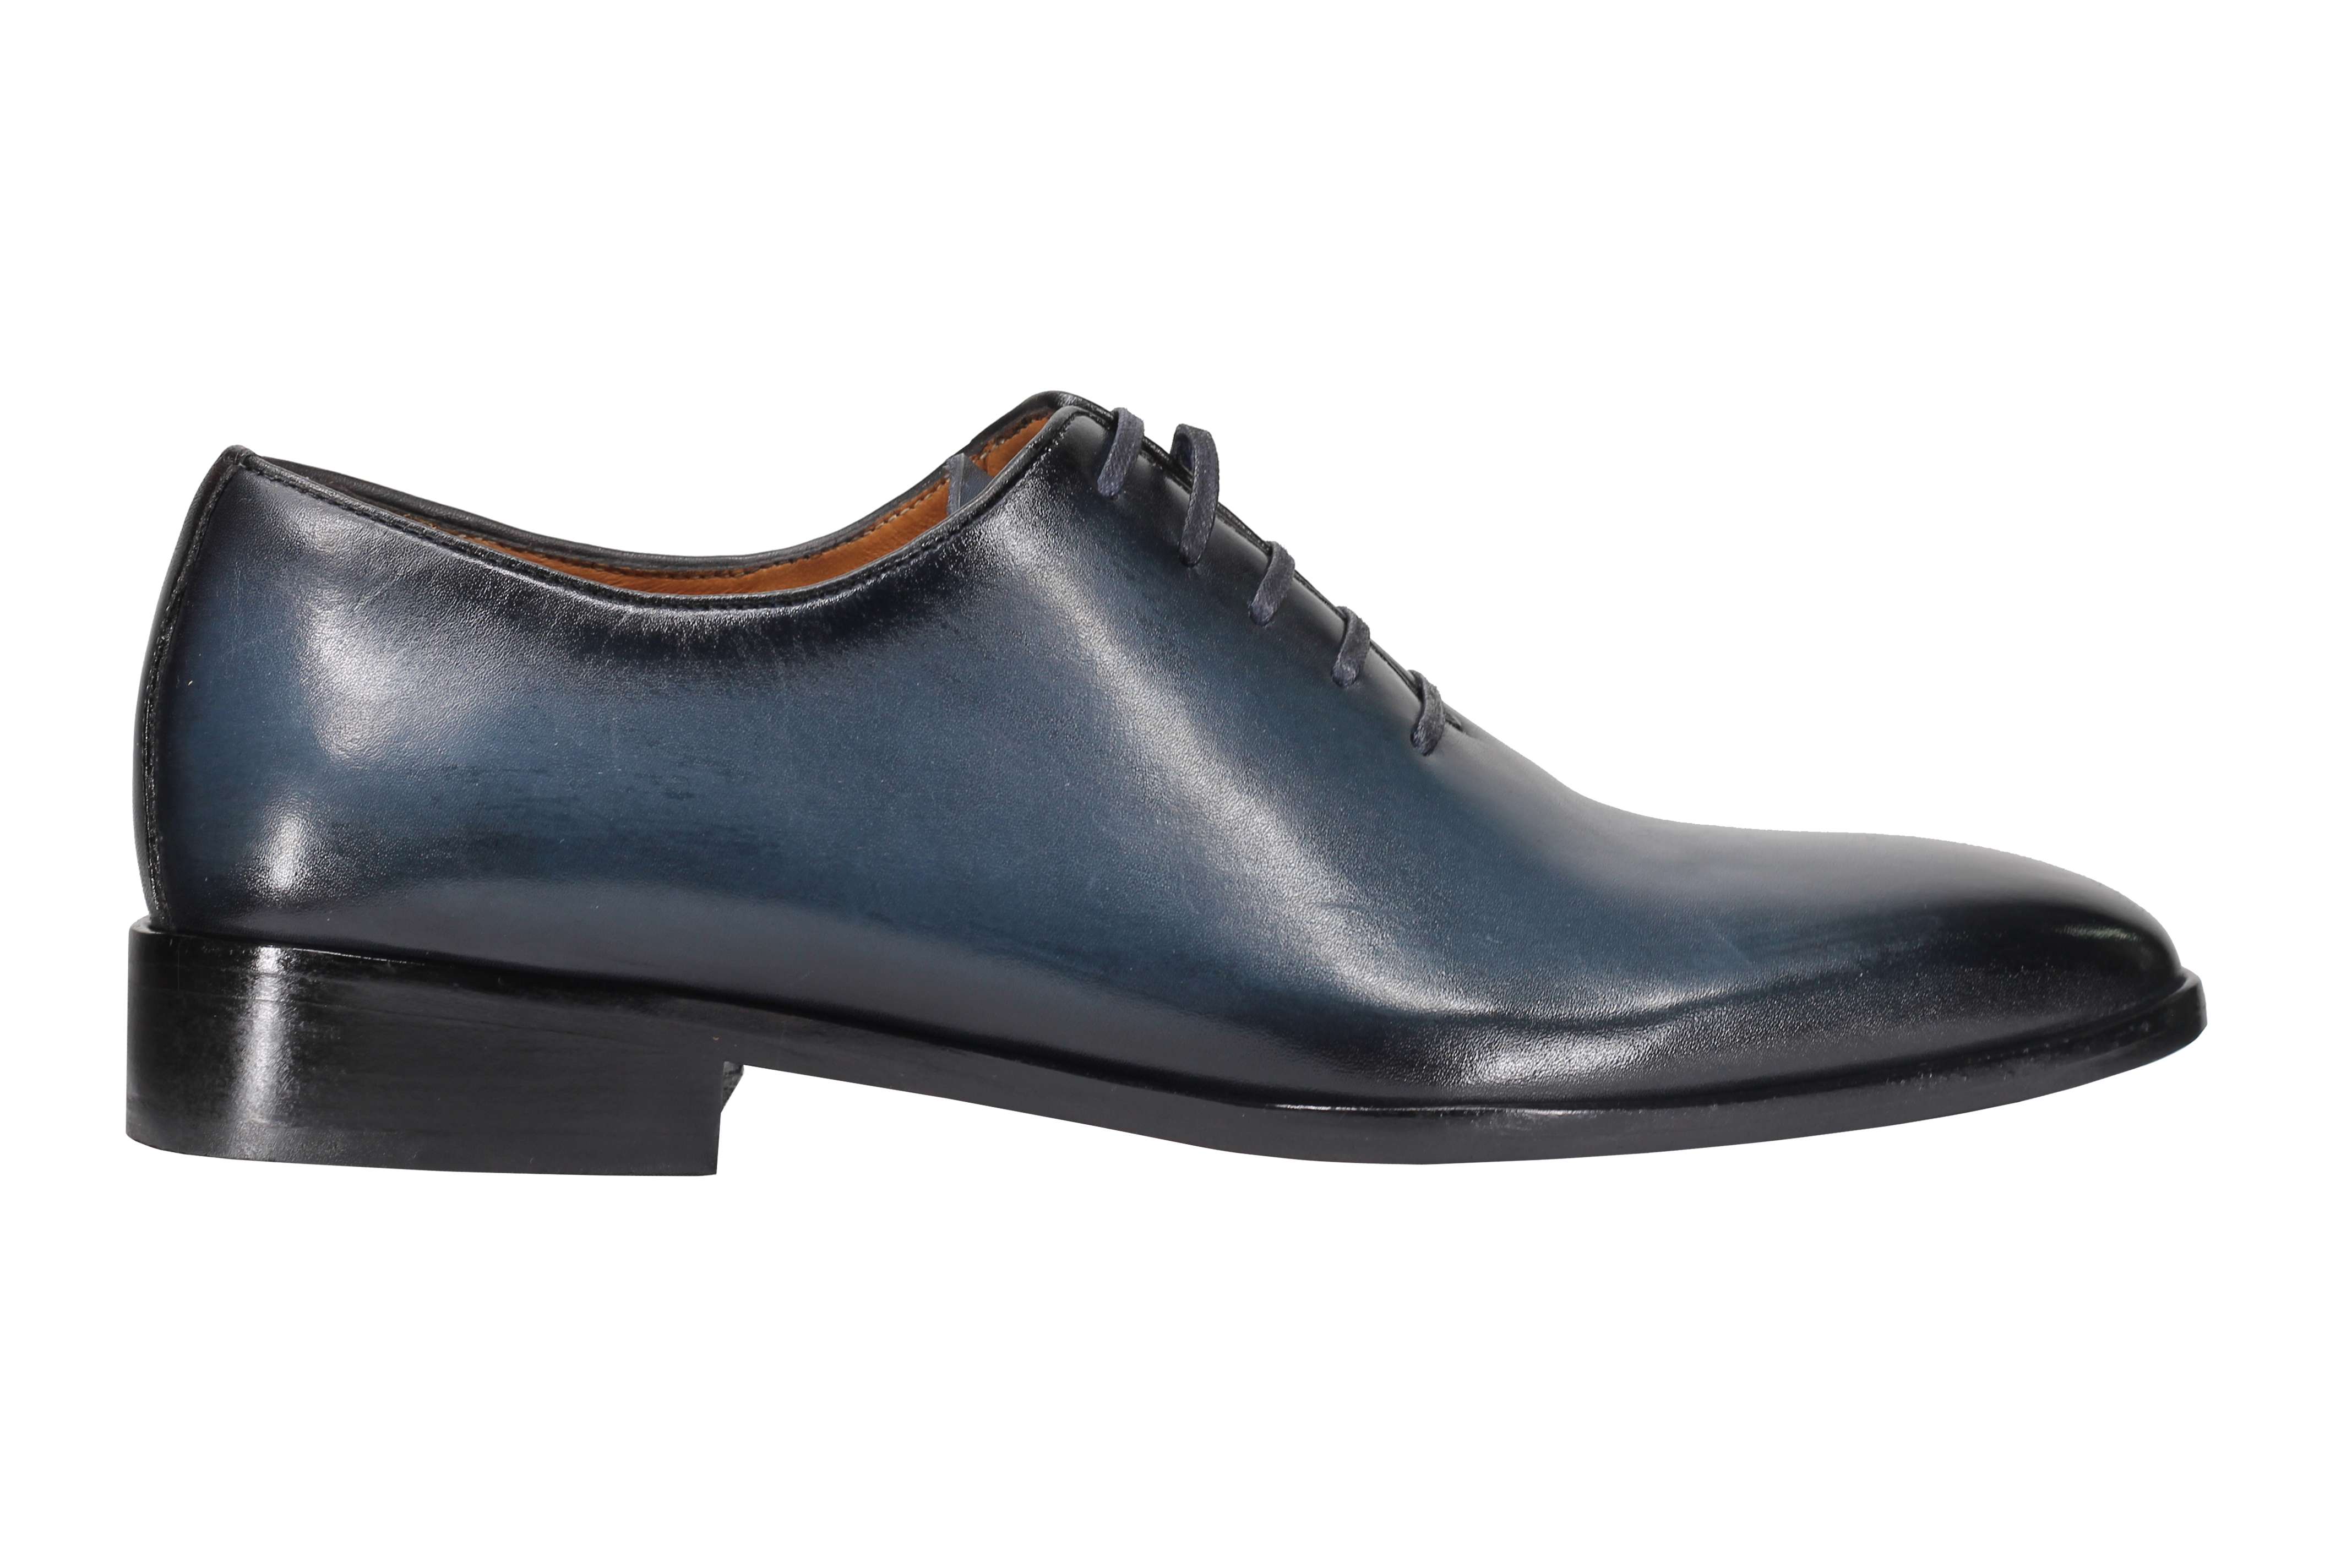 CALF LEATHER WHOLECUT OXFORD LACE UP SHOES